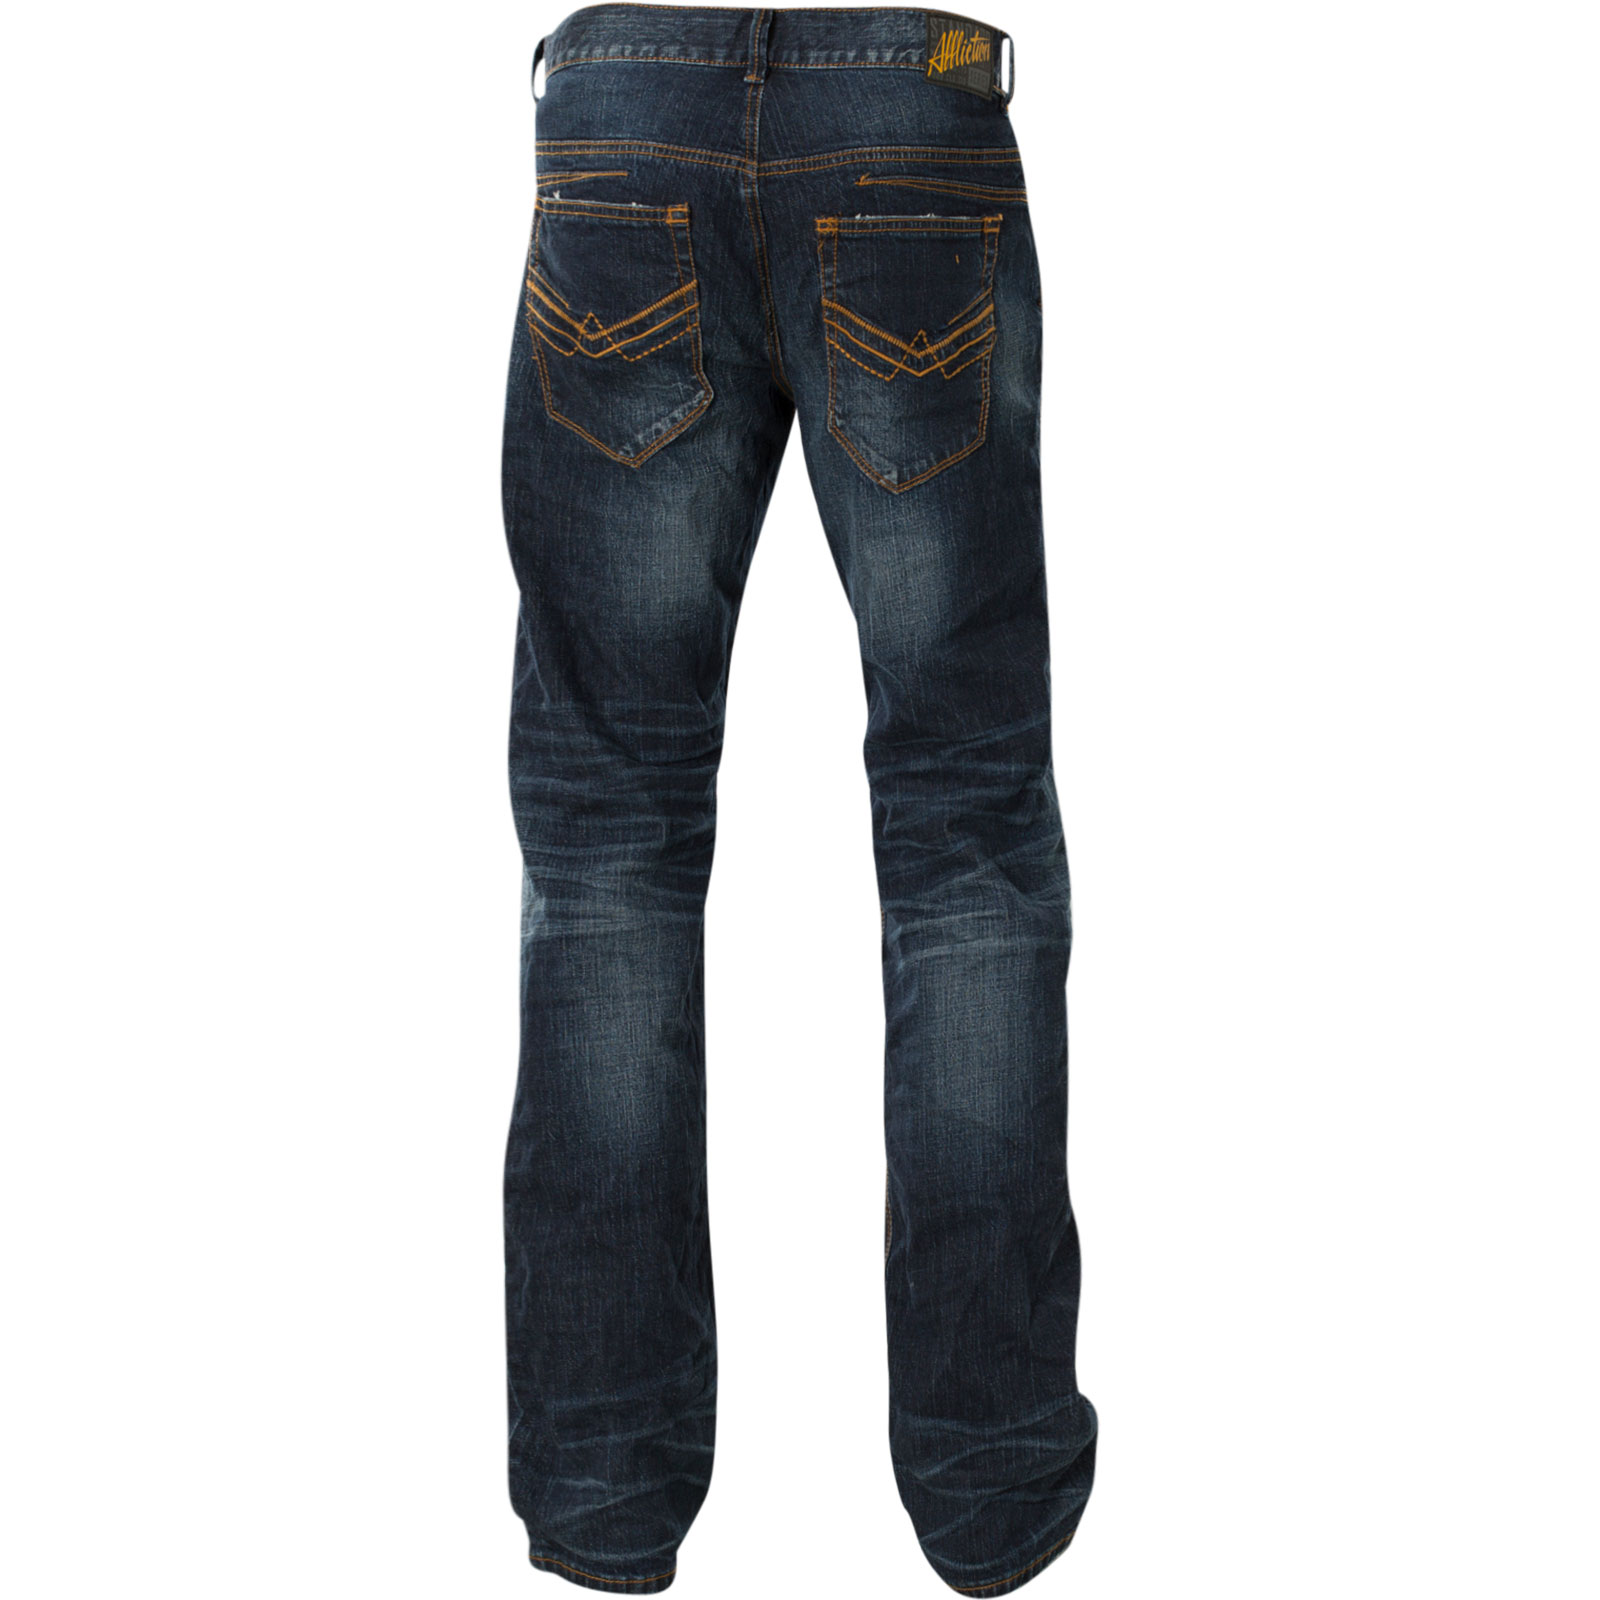 Affliction Jeans Ace Ascended Tacoma with decorative seams